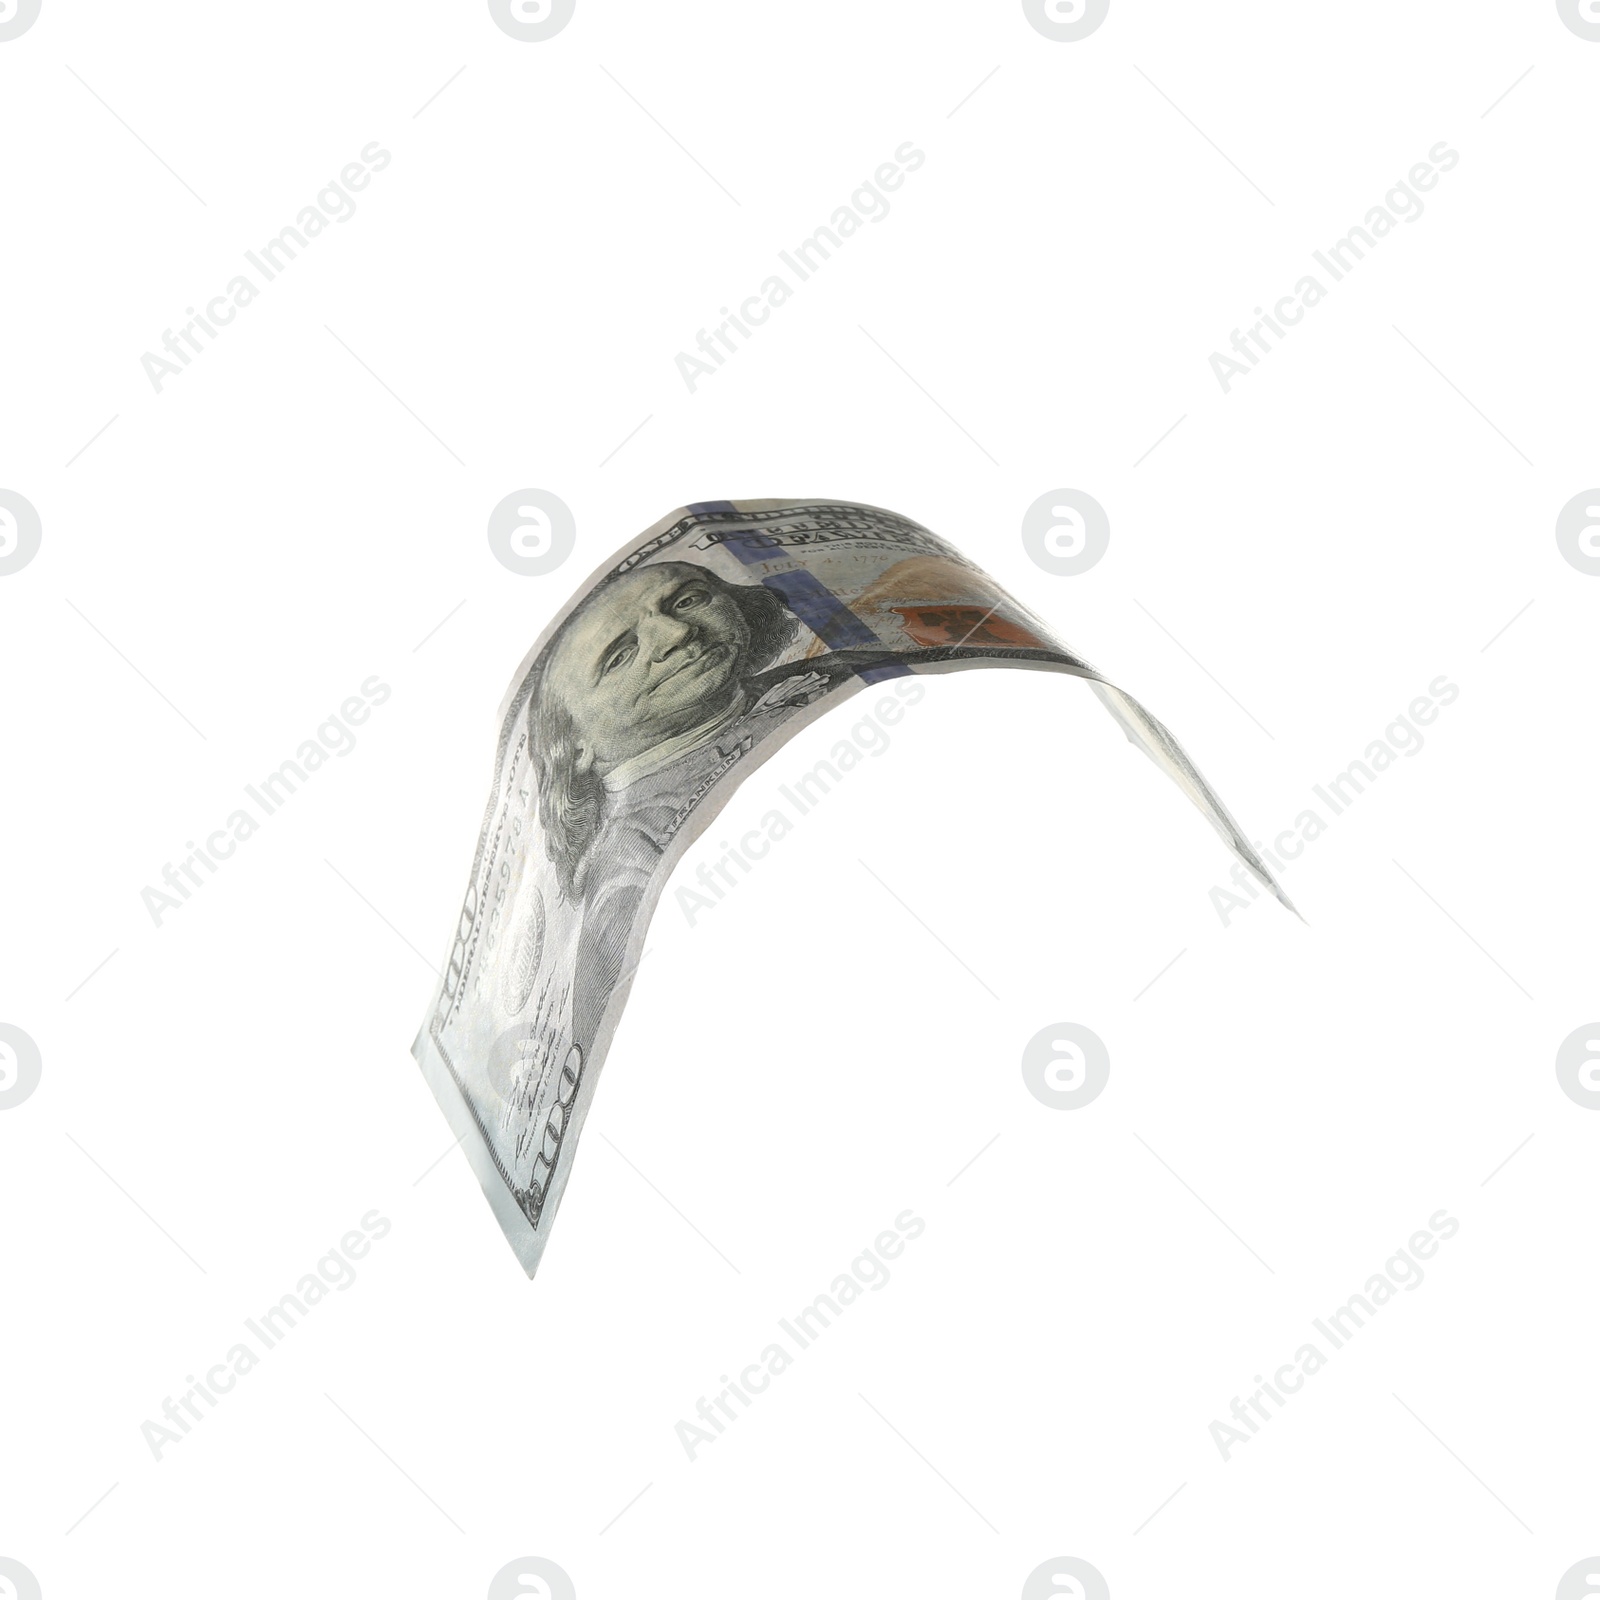 Photo of Dollar banknote isolated on white. Flying money